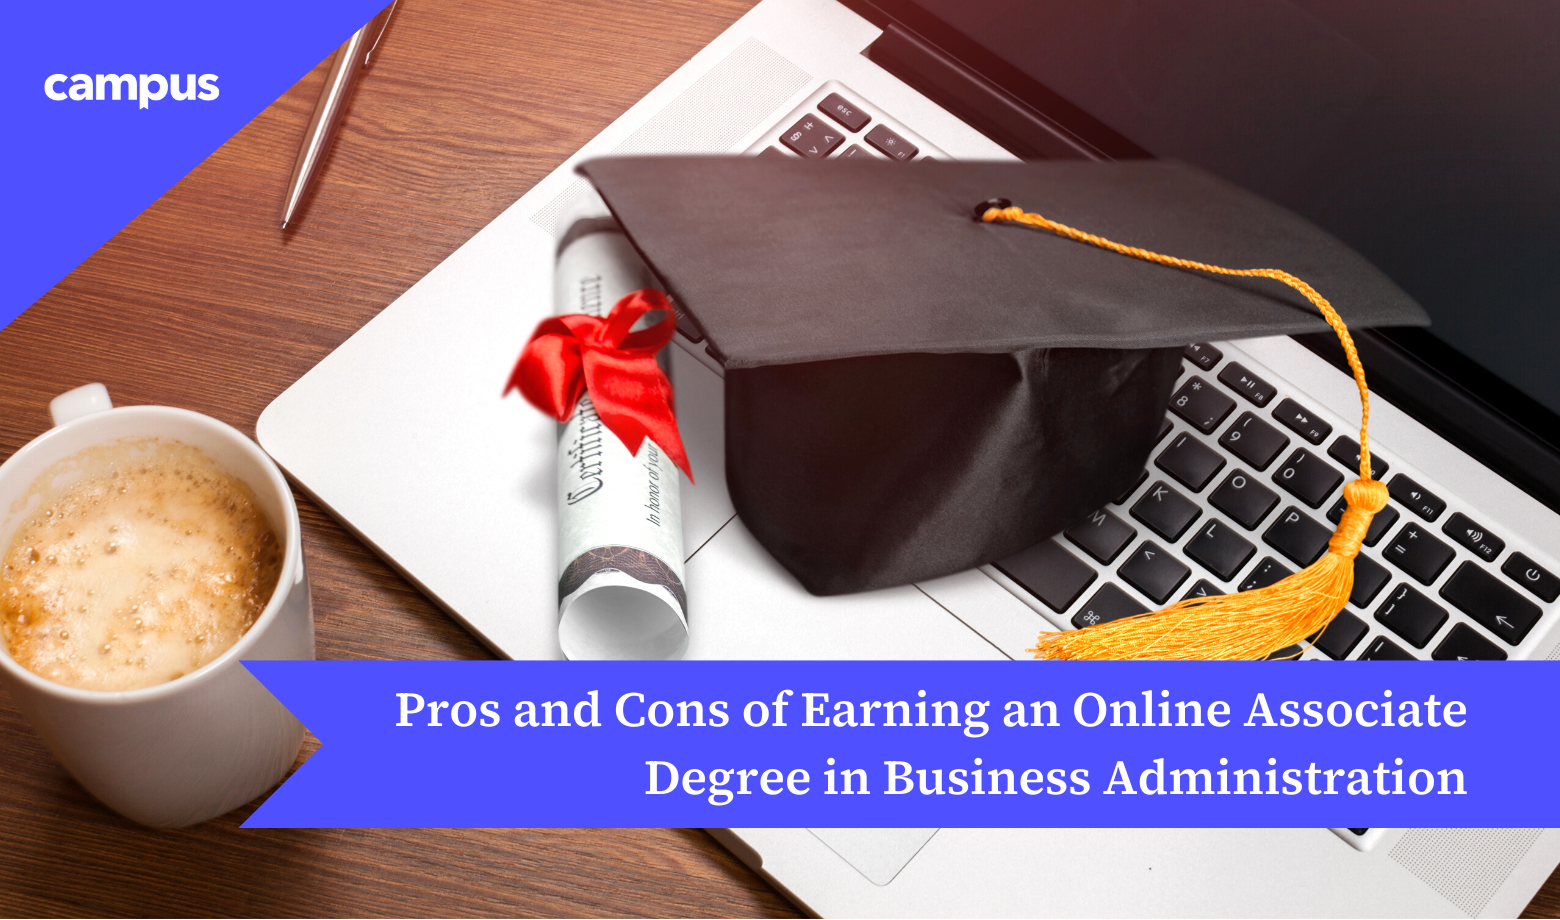 Pros and Cons of Earning an Online Associate Degree in Business Administration